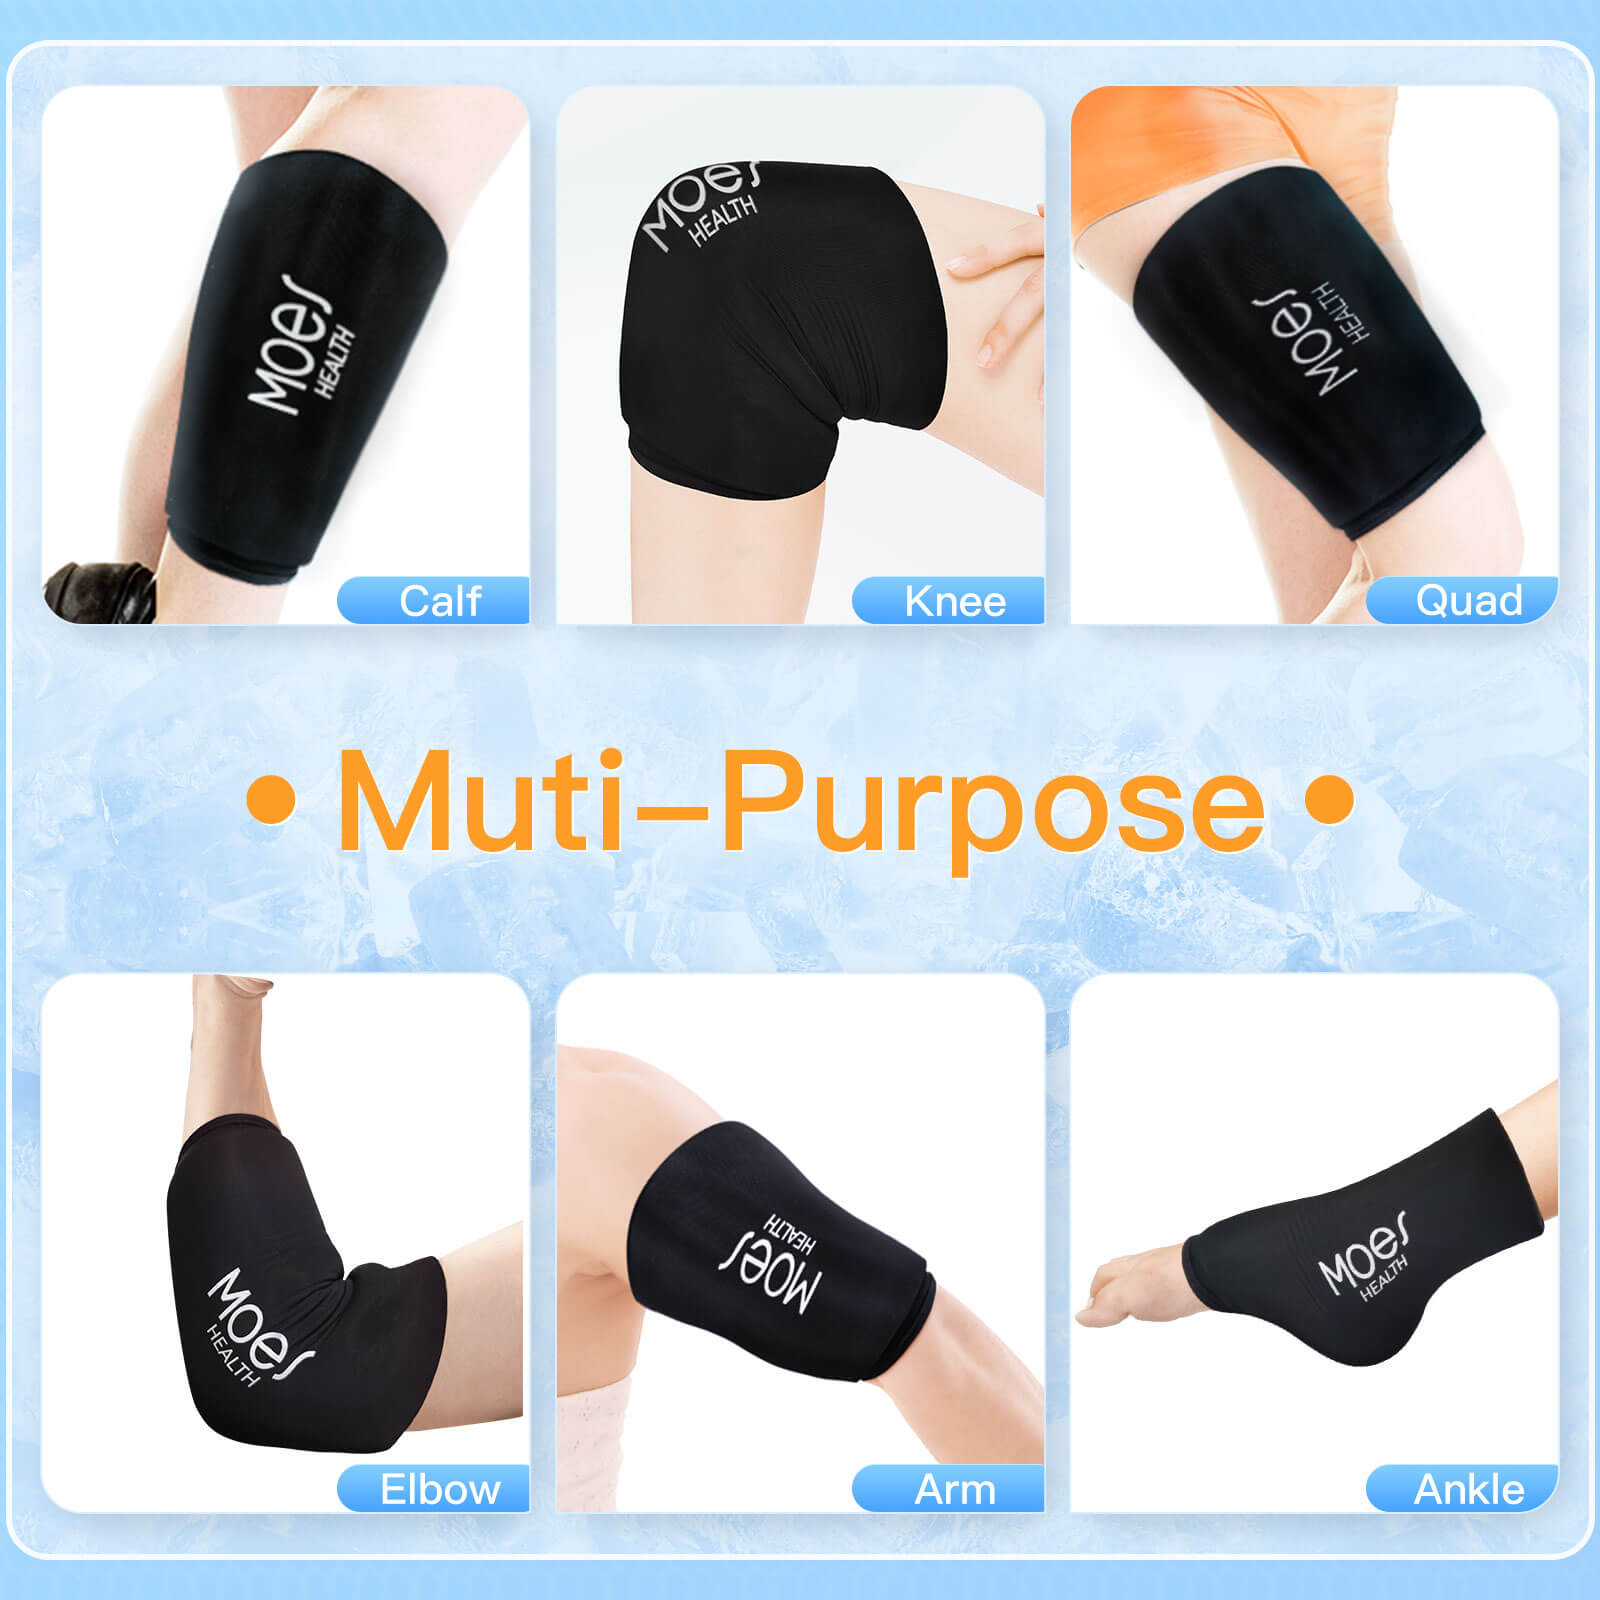 Reusable Hot & Cold Gel Compression Sleeve for Elbows, Arms, Knees